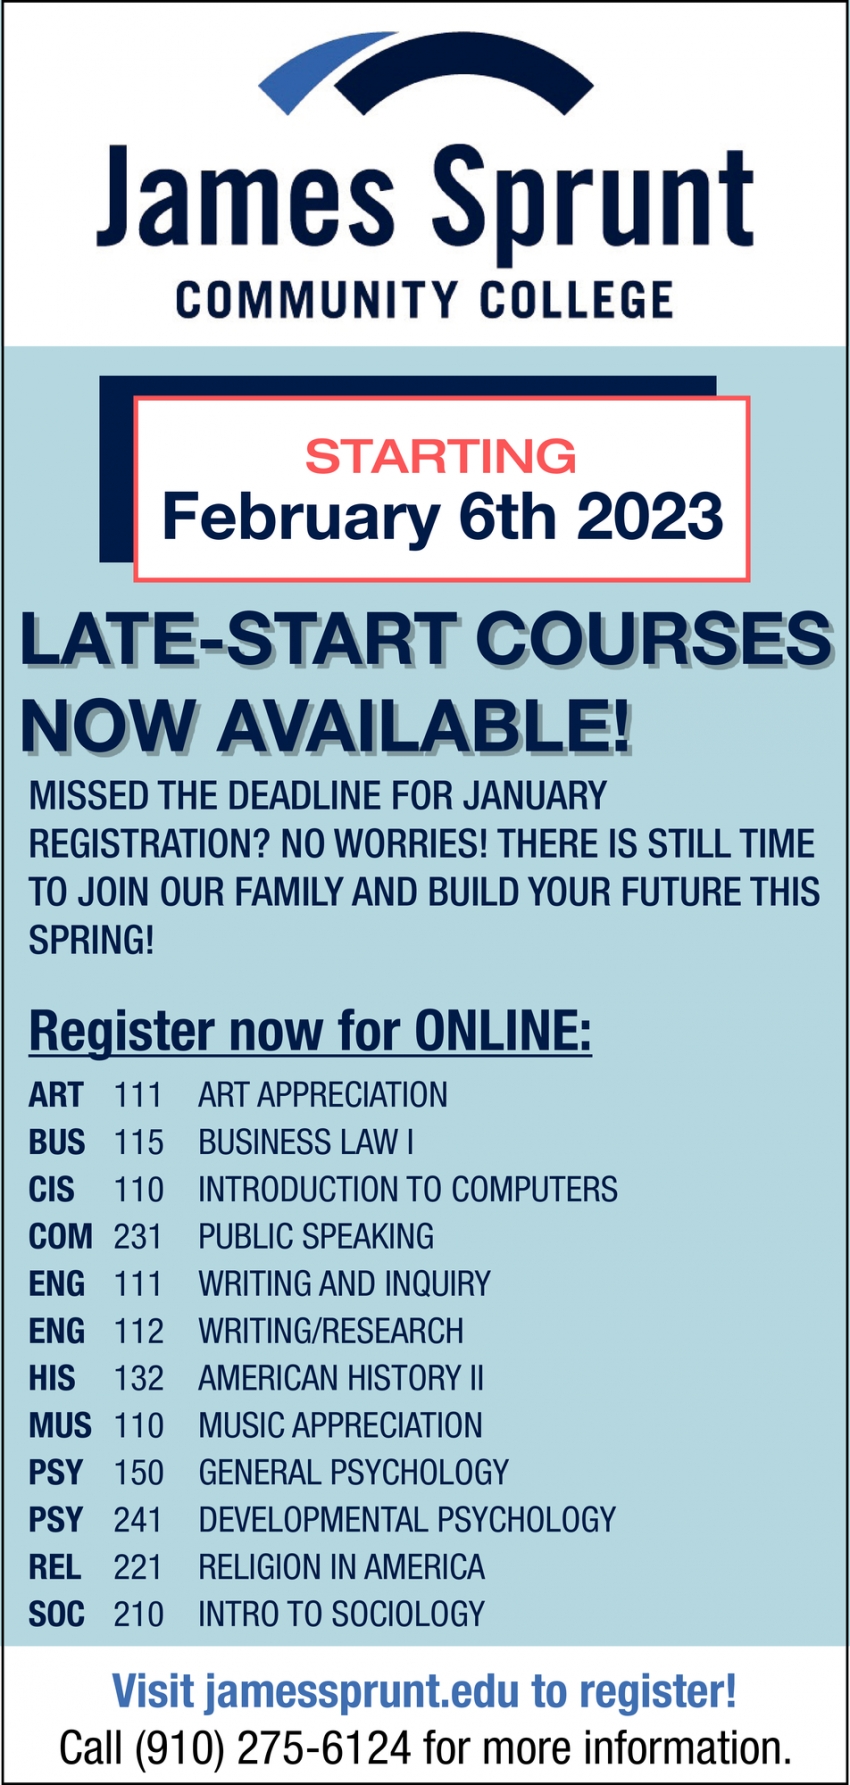 Late-Start Courses Now Available!